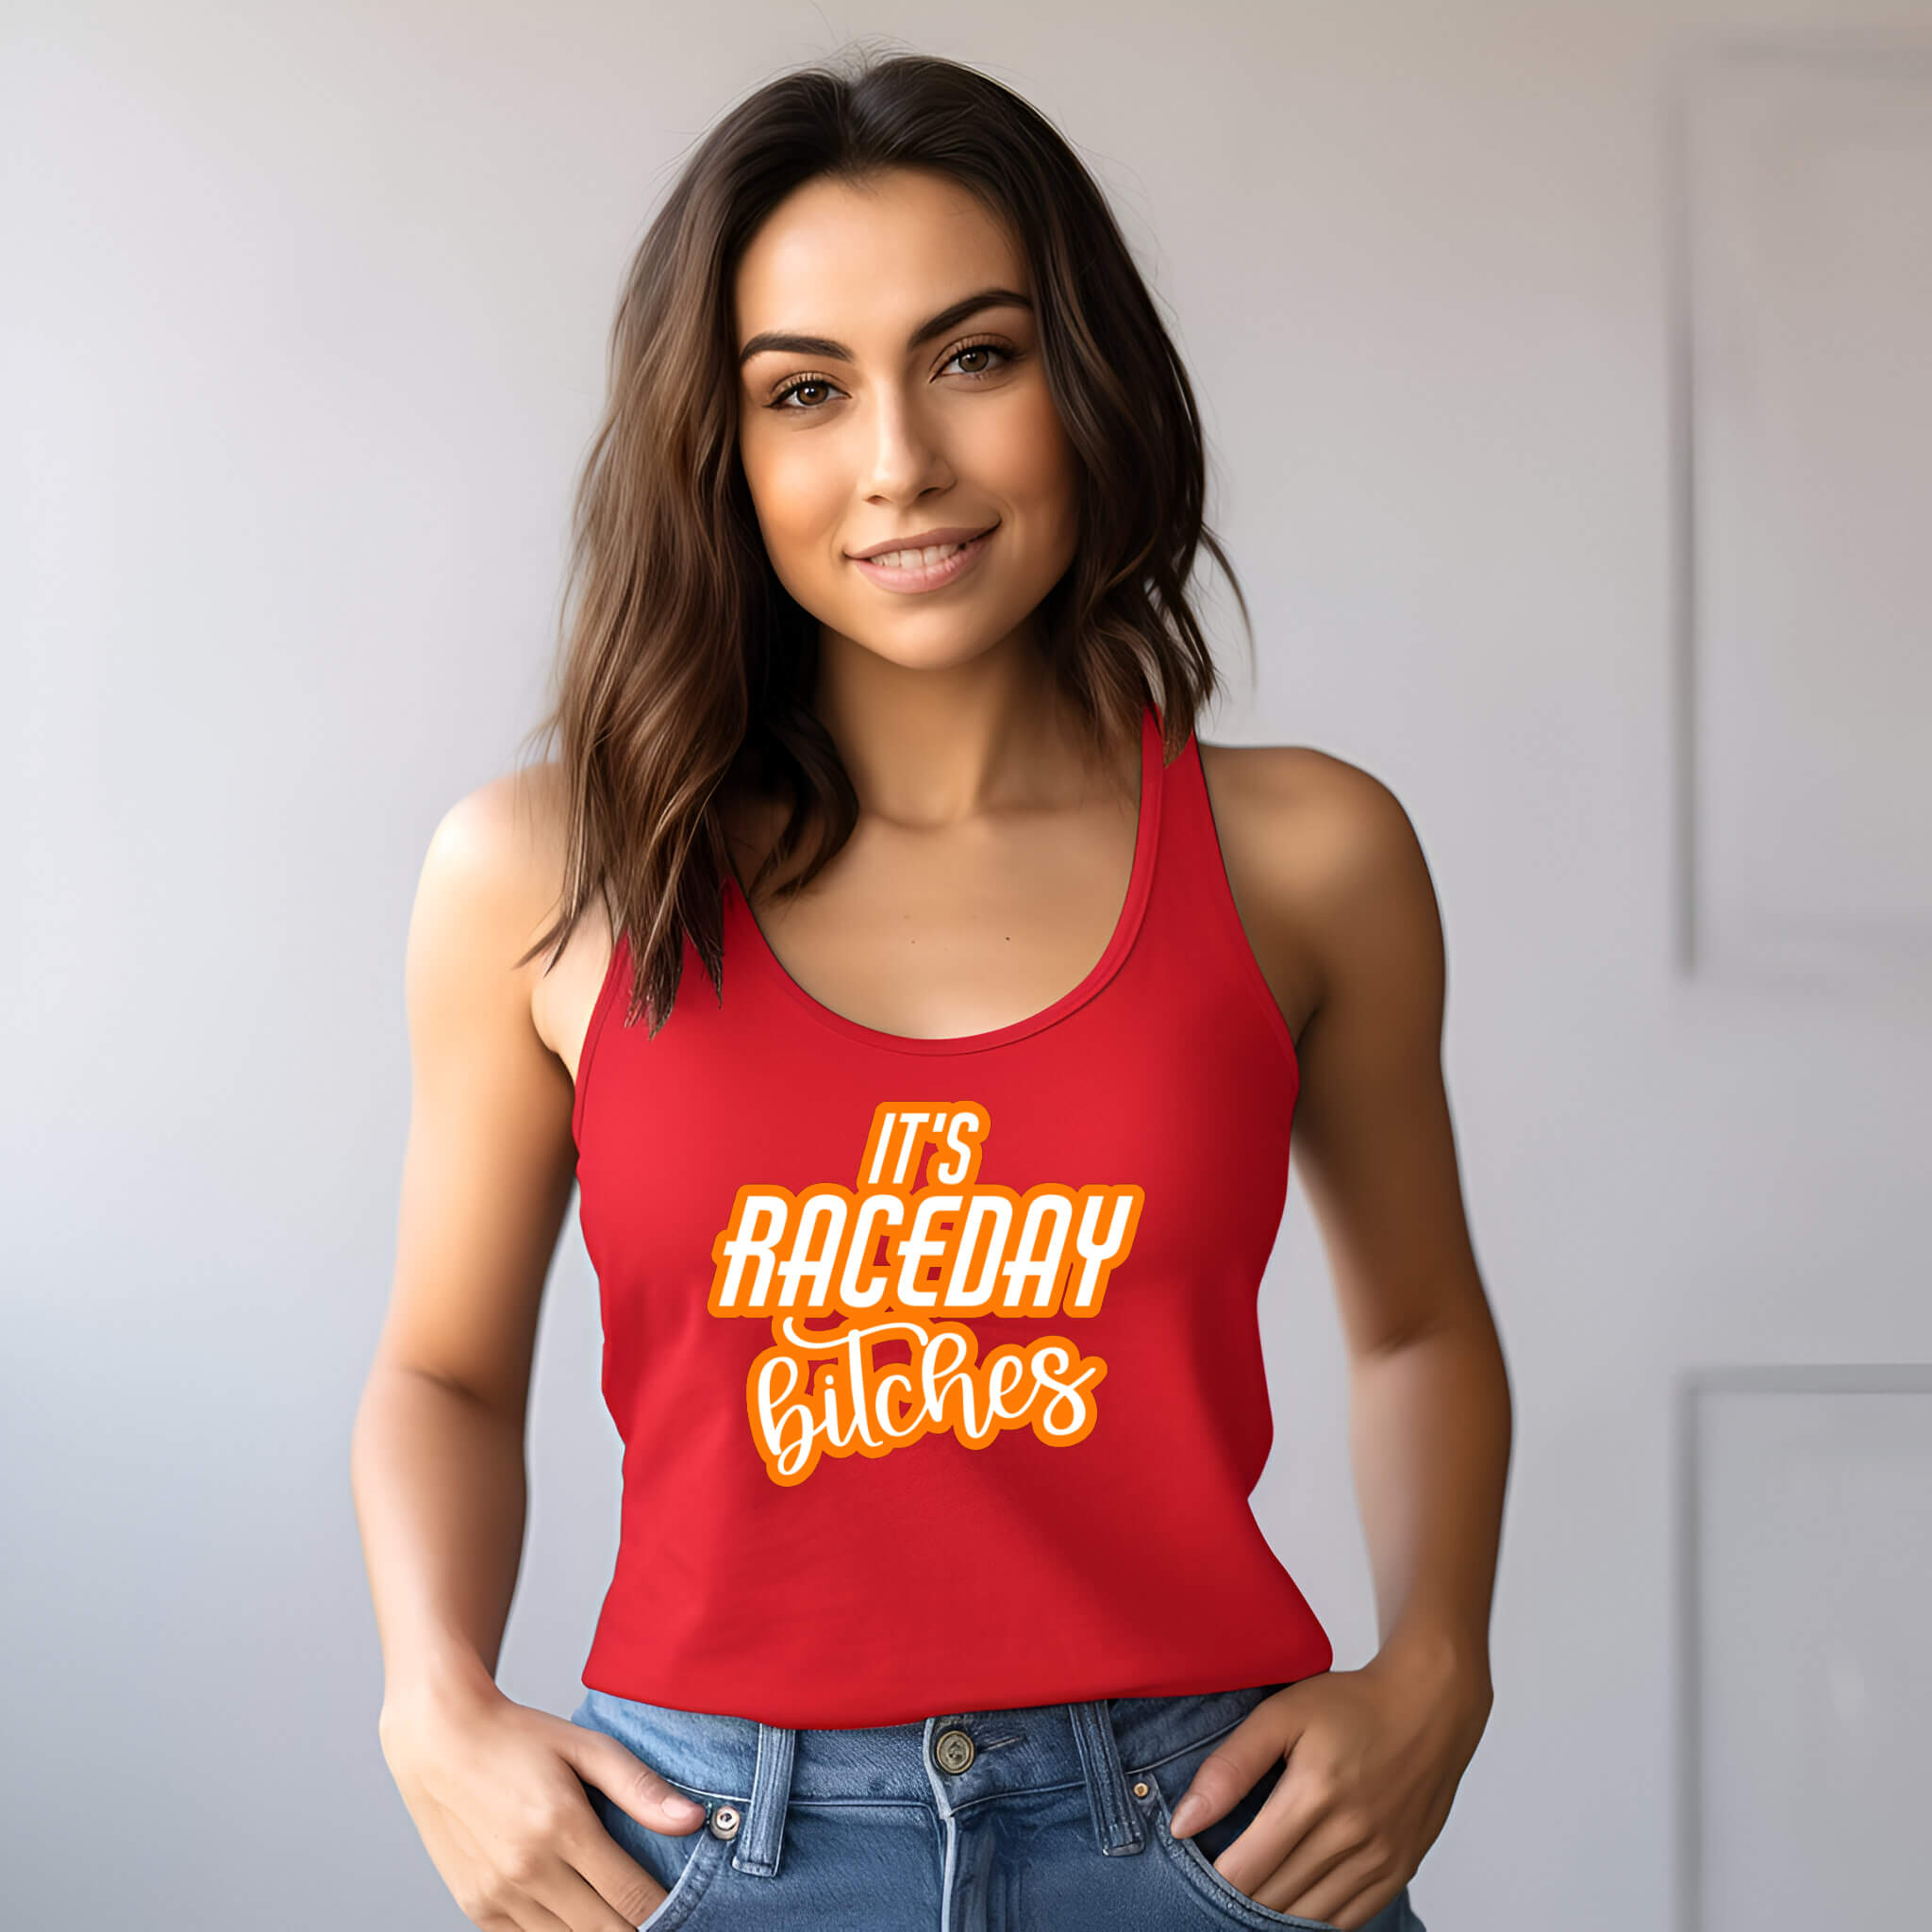 Racing - It's Race Day Bitches Graphic Print Women’s Tank Top